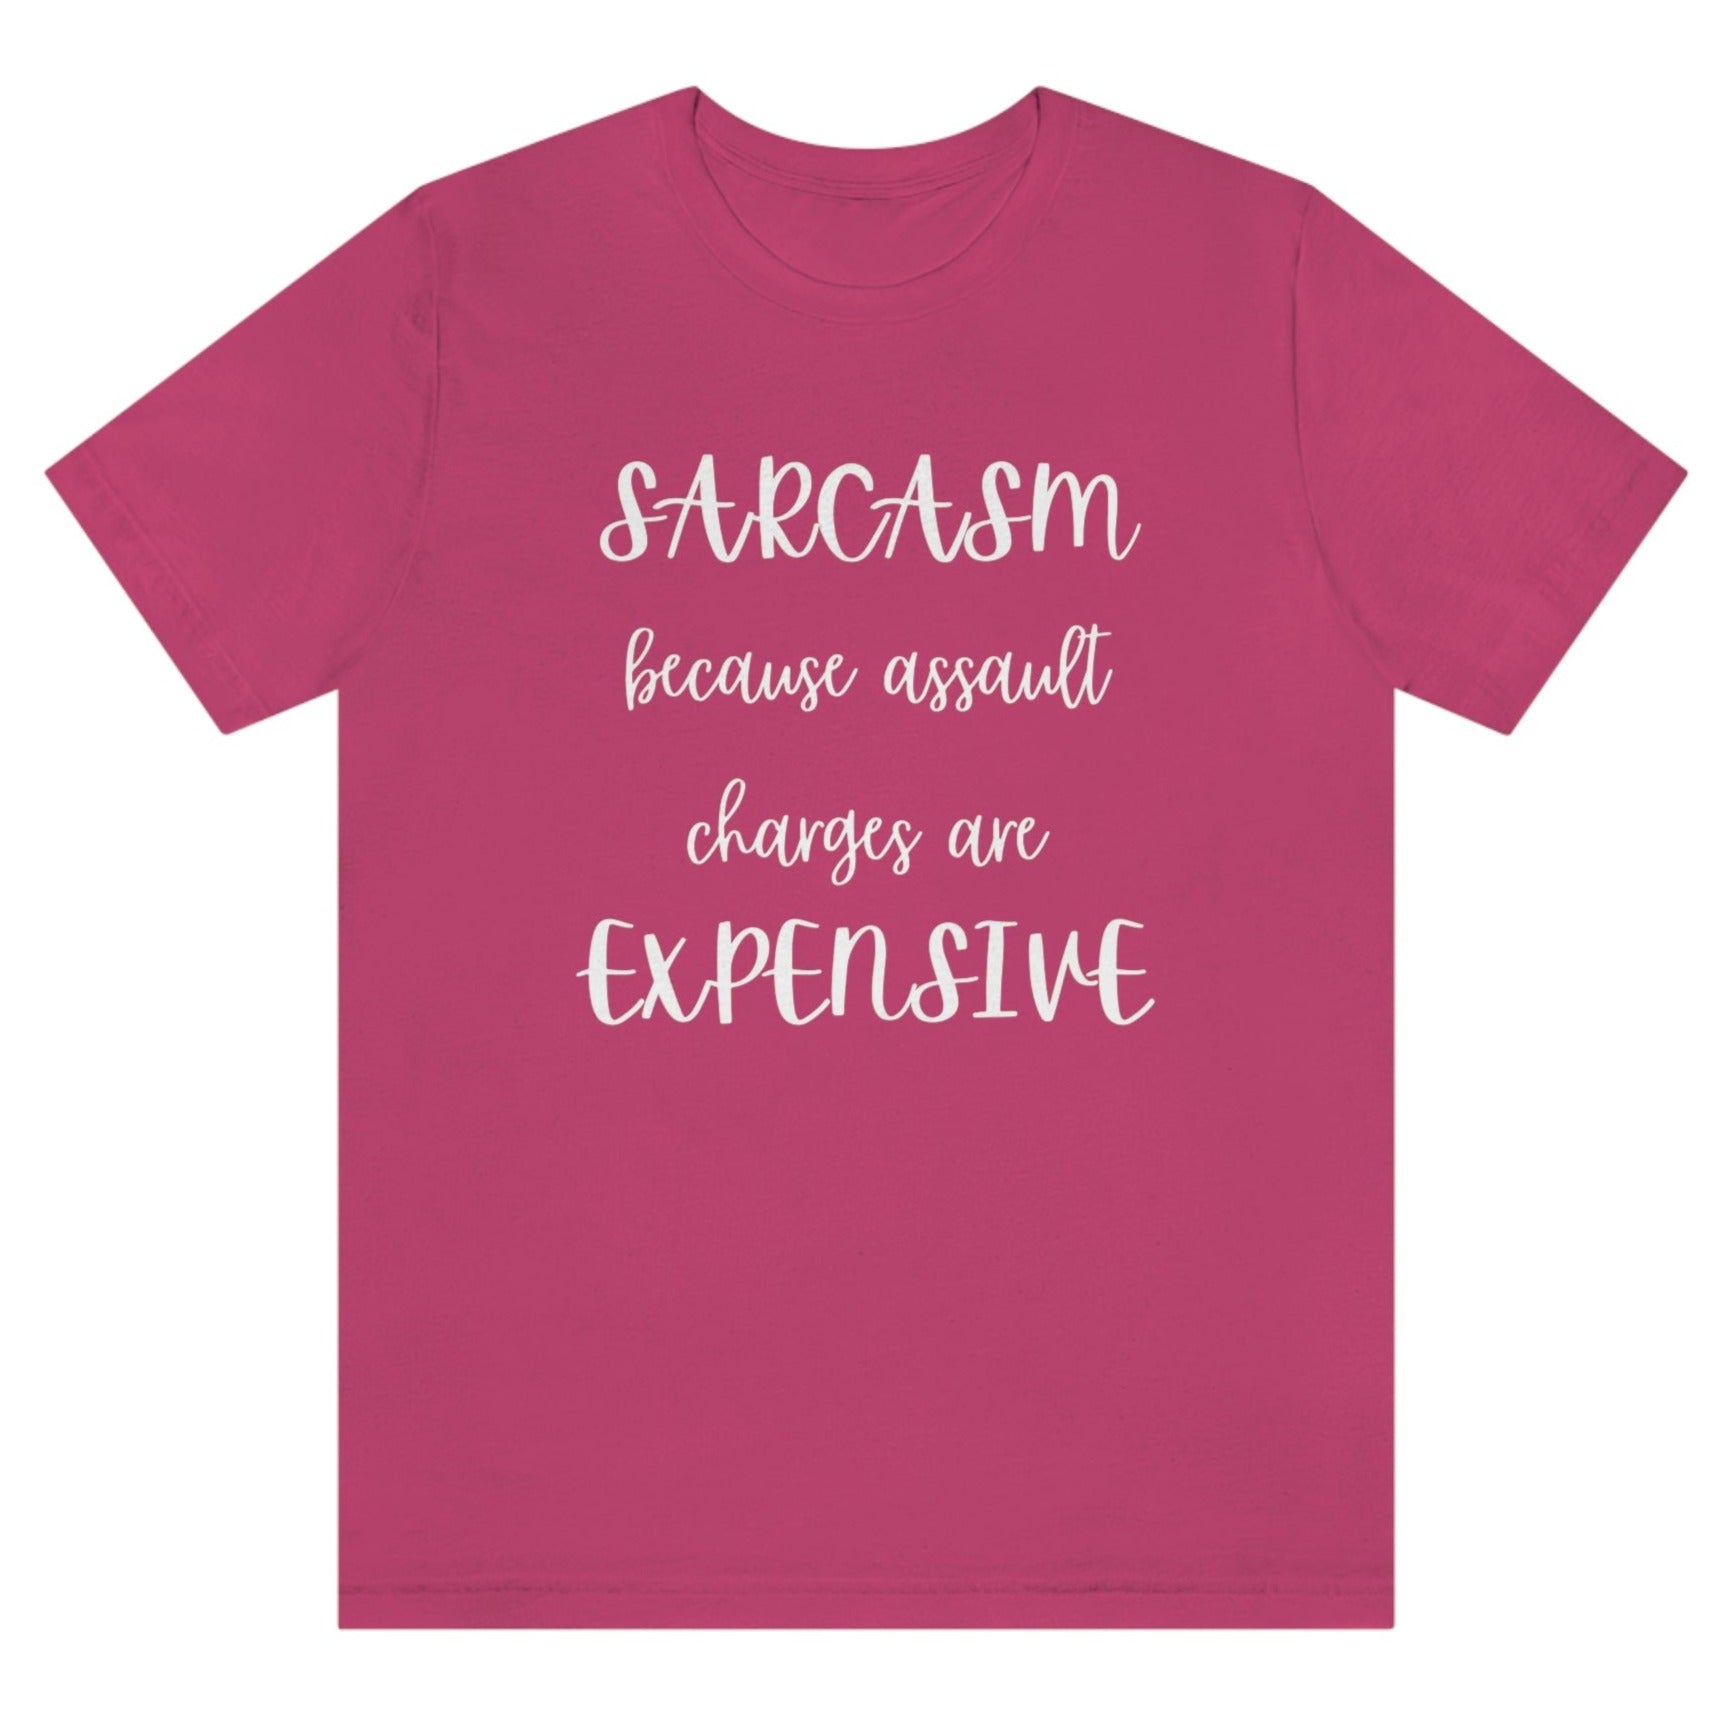 sarcasm-because-assault-charges-are-expensive-berry-t-shirt-women-funny-sarcastic